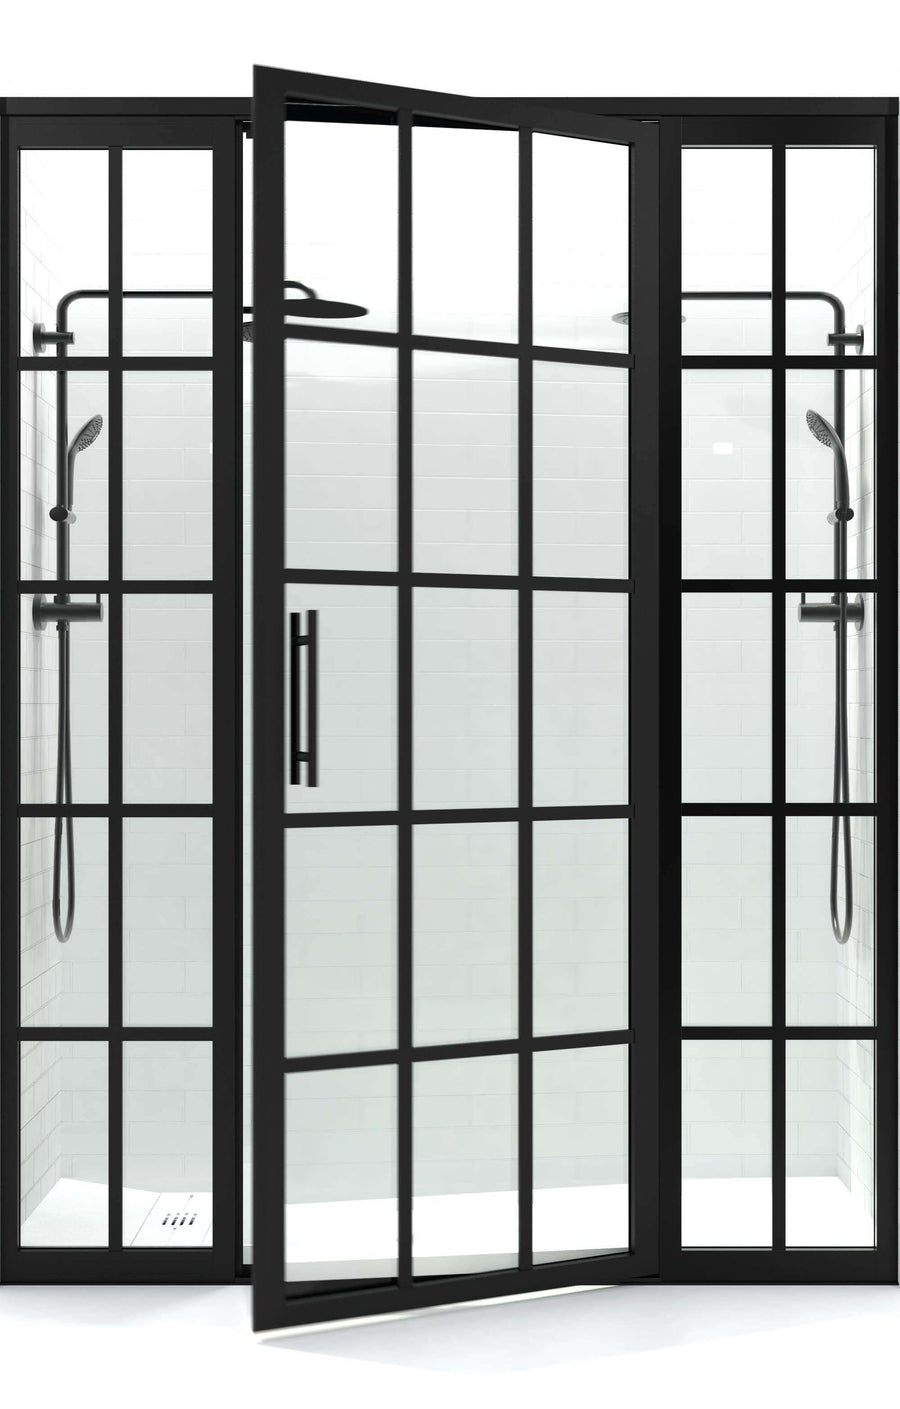 Black Framed Hinged Shower Door by Coastal with Factory Windowpane Industrial Style Mullions on outside of tempered Glass.   Shower door beteeen two side panels.